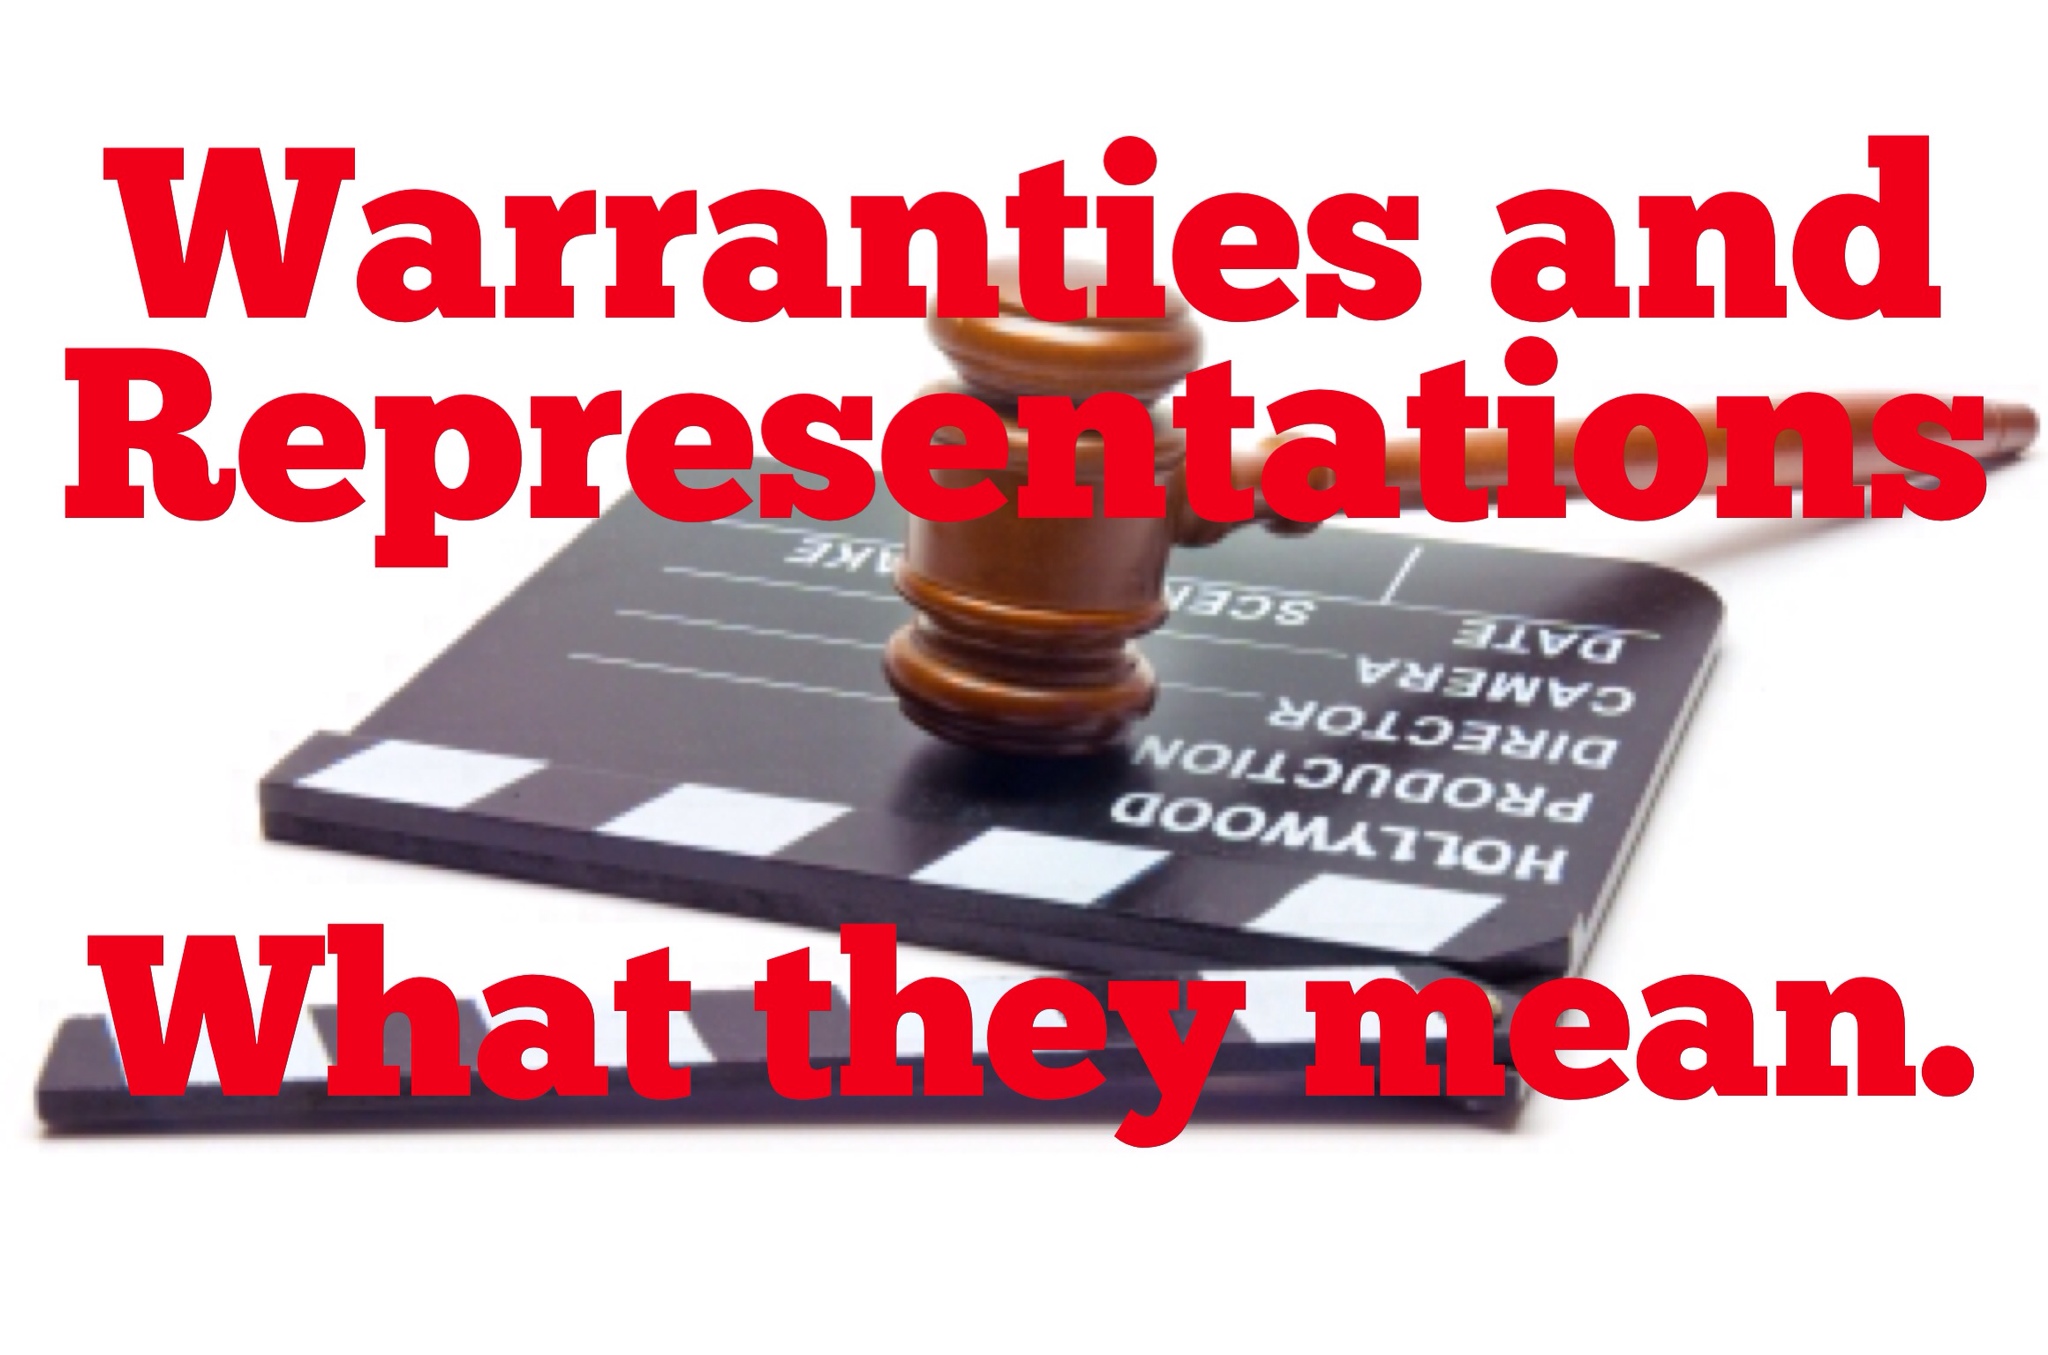 definition of representations and warranties